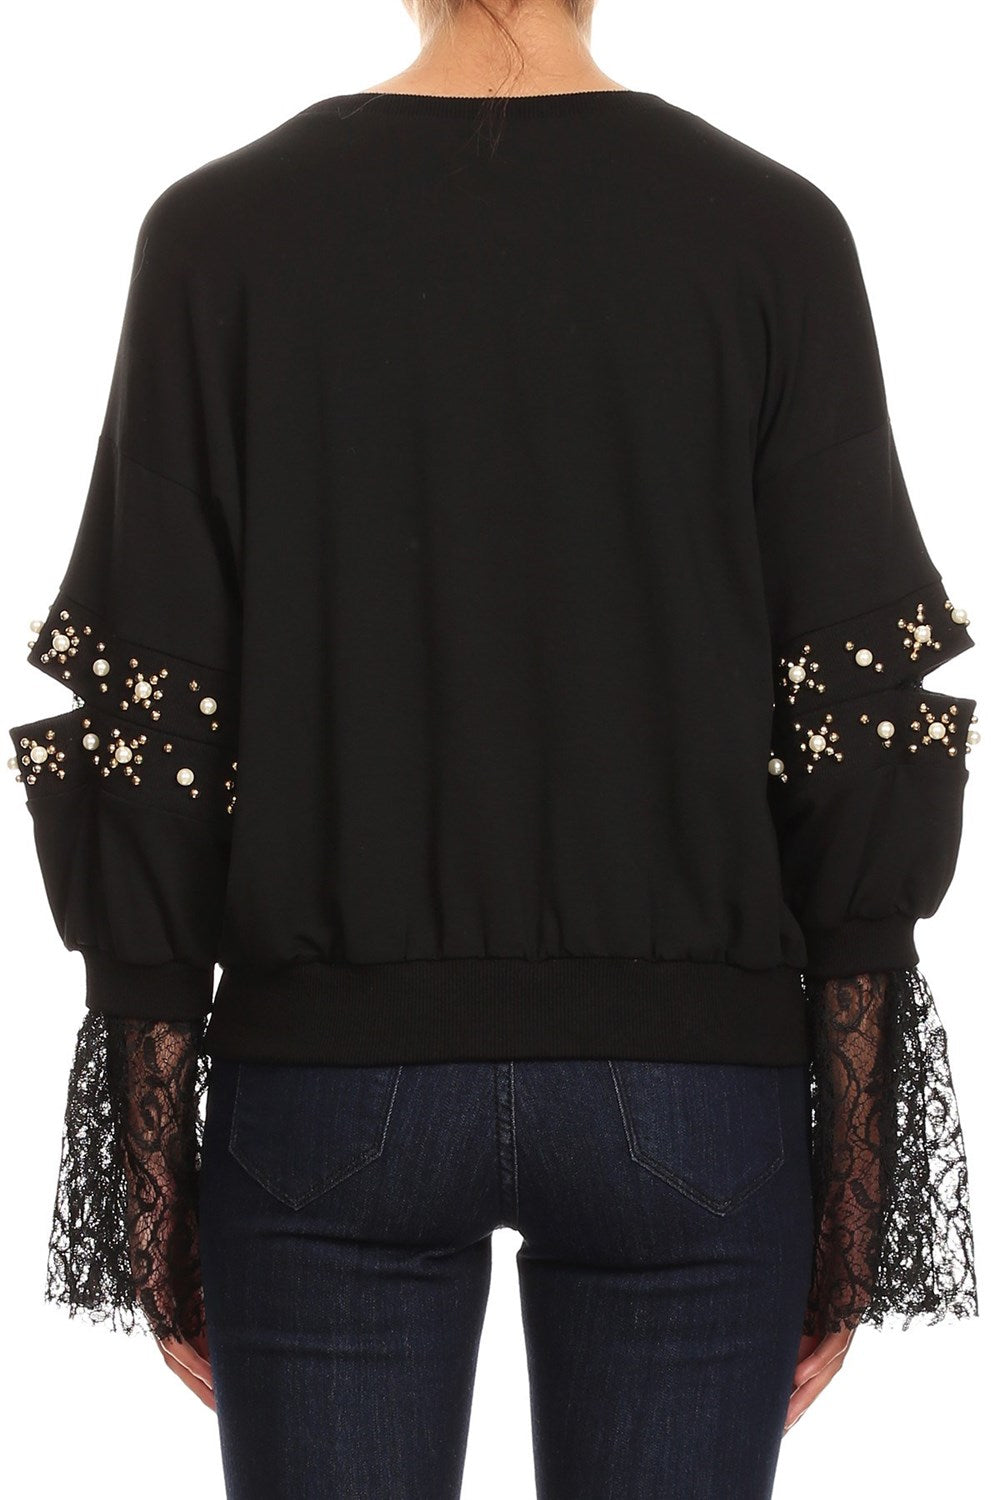 Fashion Pearl Gold Detailed Open Sleeve Black Lace Sweater